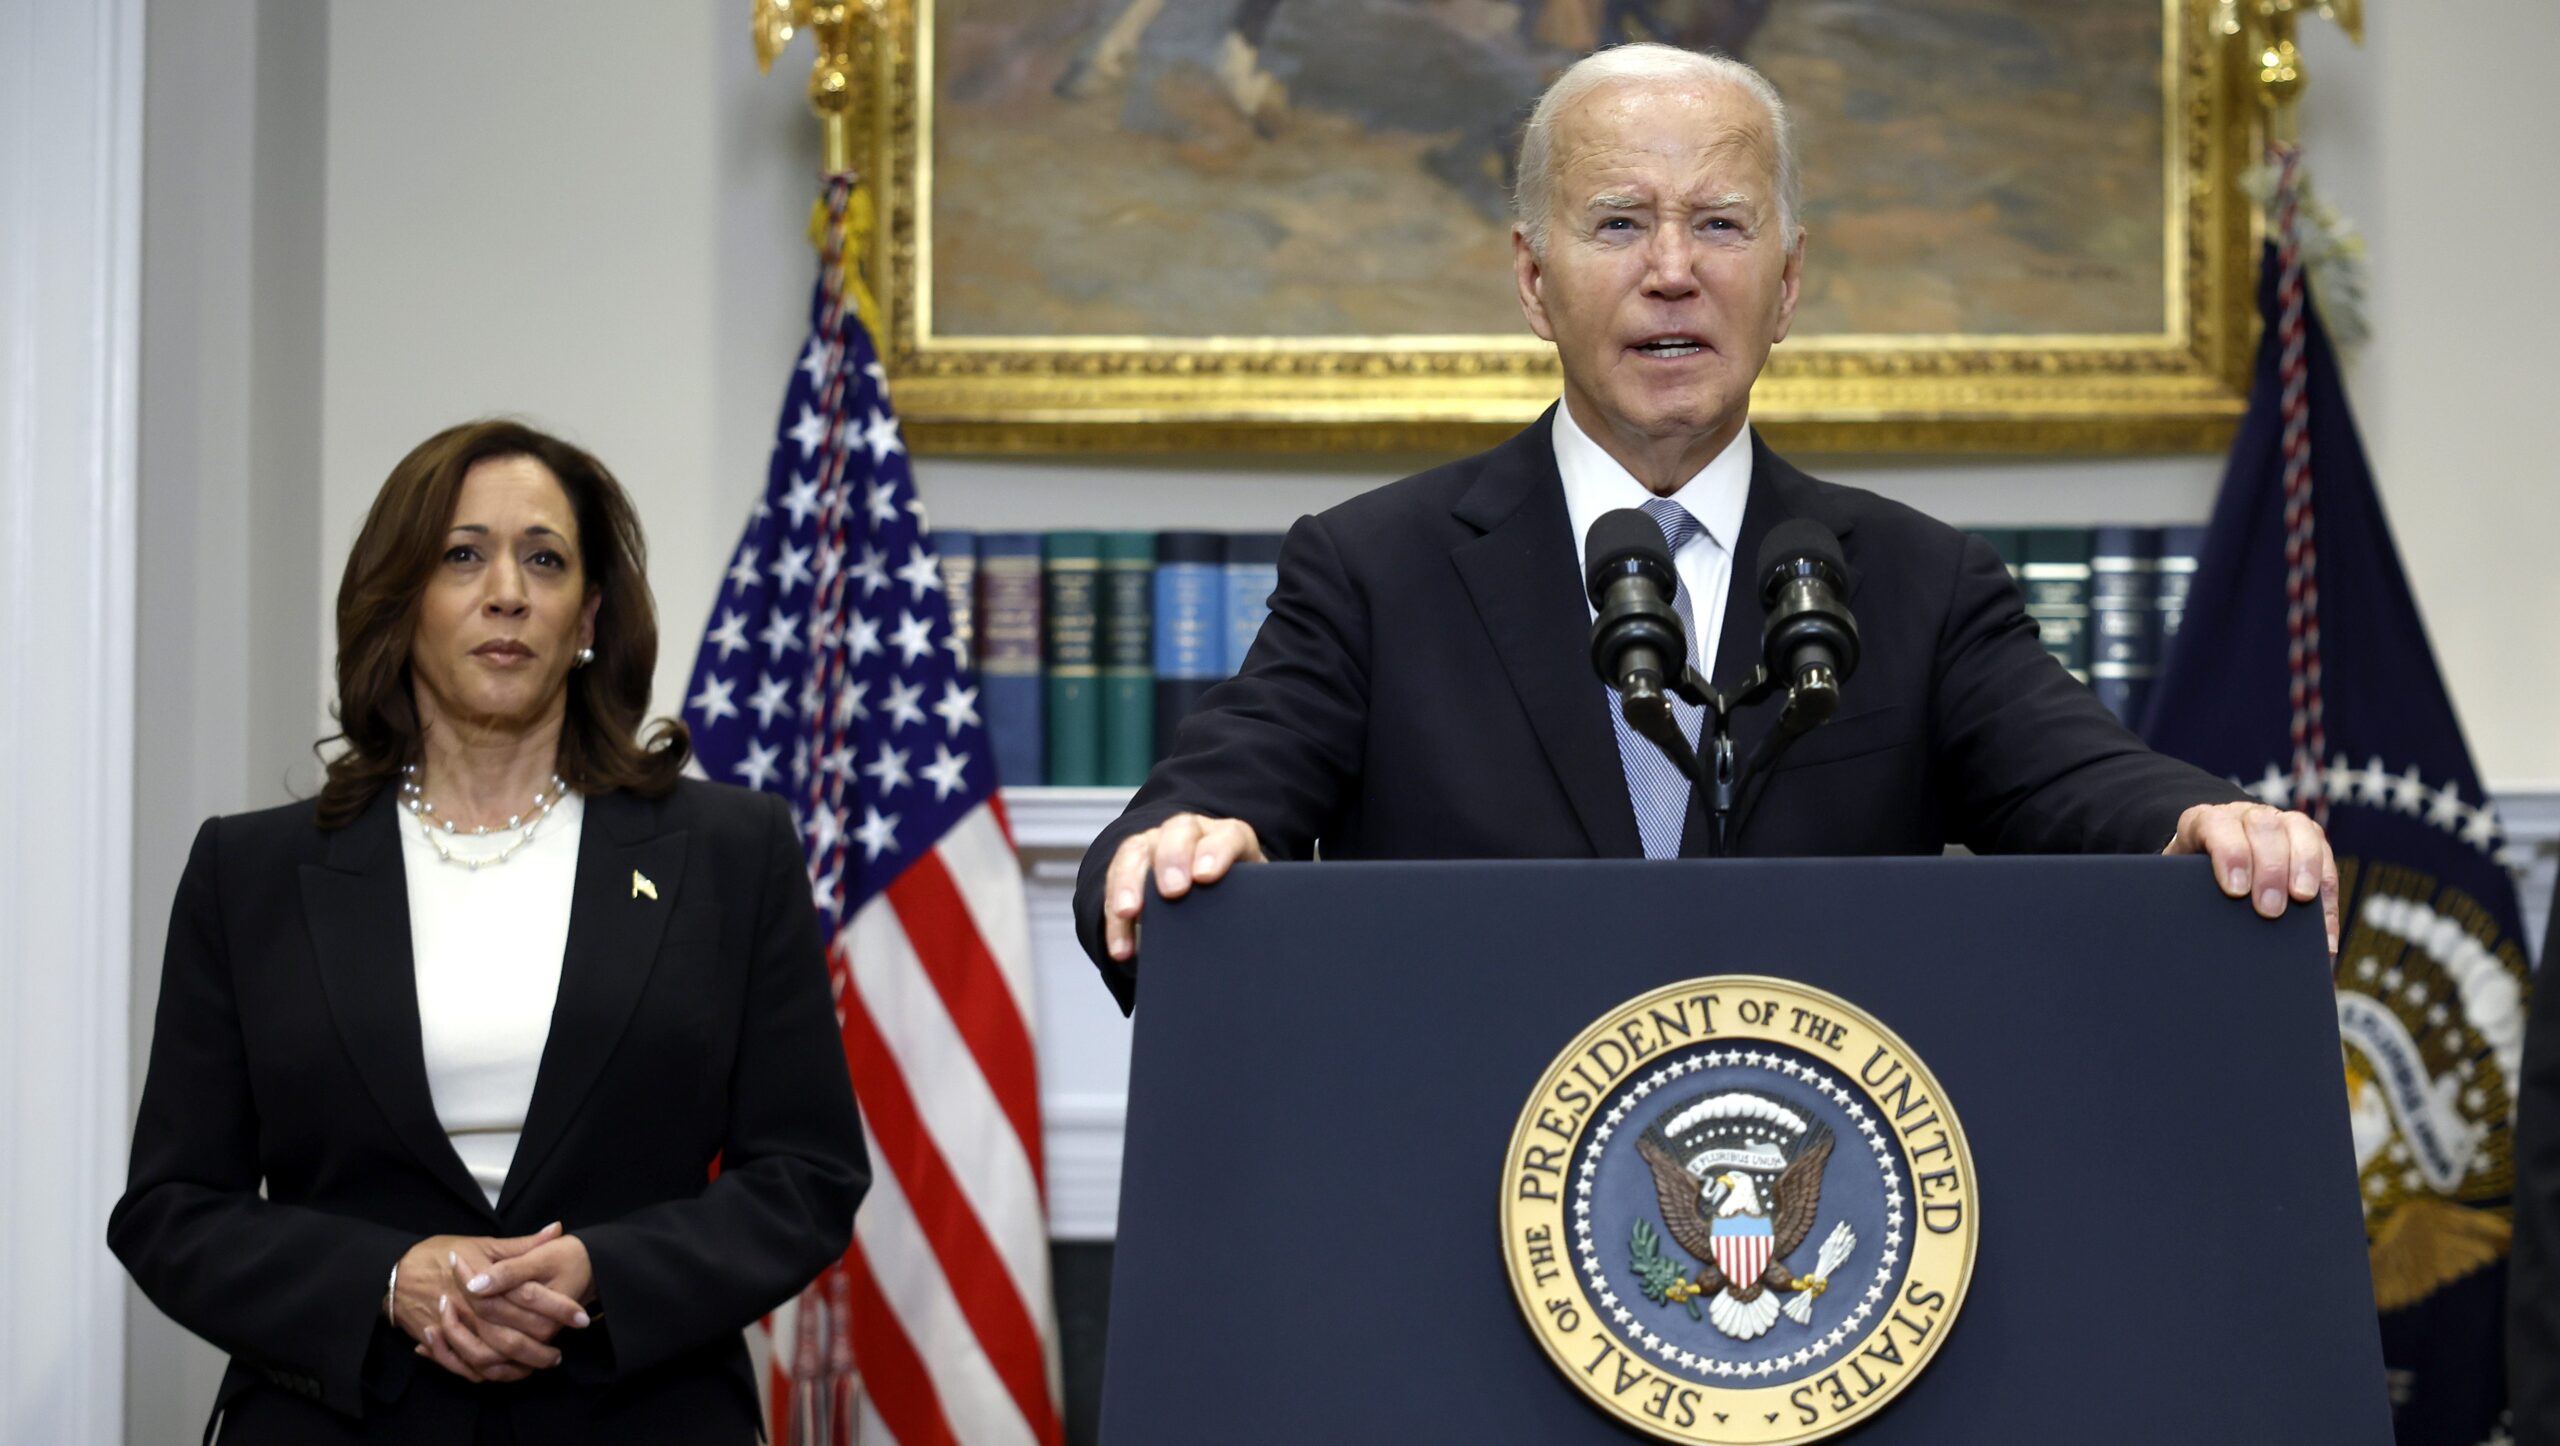 WASHINGTON, DC - JULY 14: U.S. President Joe Biden delivers remarks on the assassination attempt on Republican presidential candidate former President Donald Trump at the White House on July 14, 2024 in Washington, DC. A shooter opened fire injuring former President Trump, killing one audience member, and injuring two others during a campaign event in Butler, Pennsylvania on July 13. Biden was joined by Vice President Kamala Harris. (Photo by Kevin Dietsch/Getty Images)